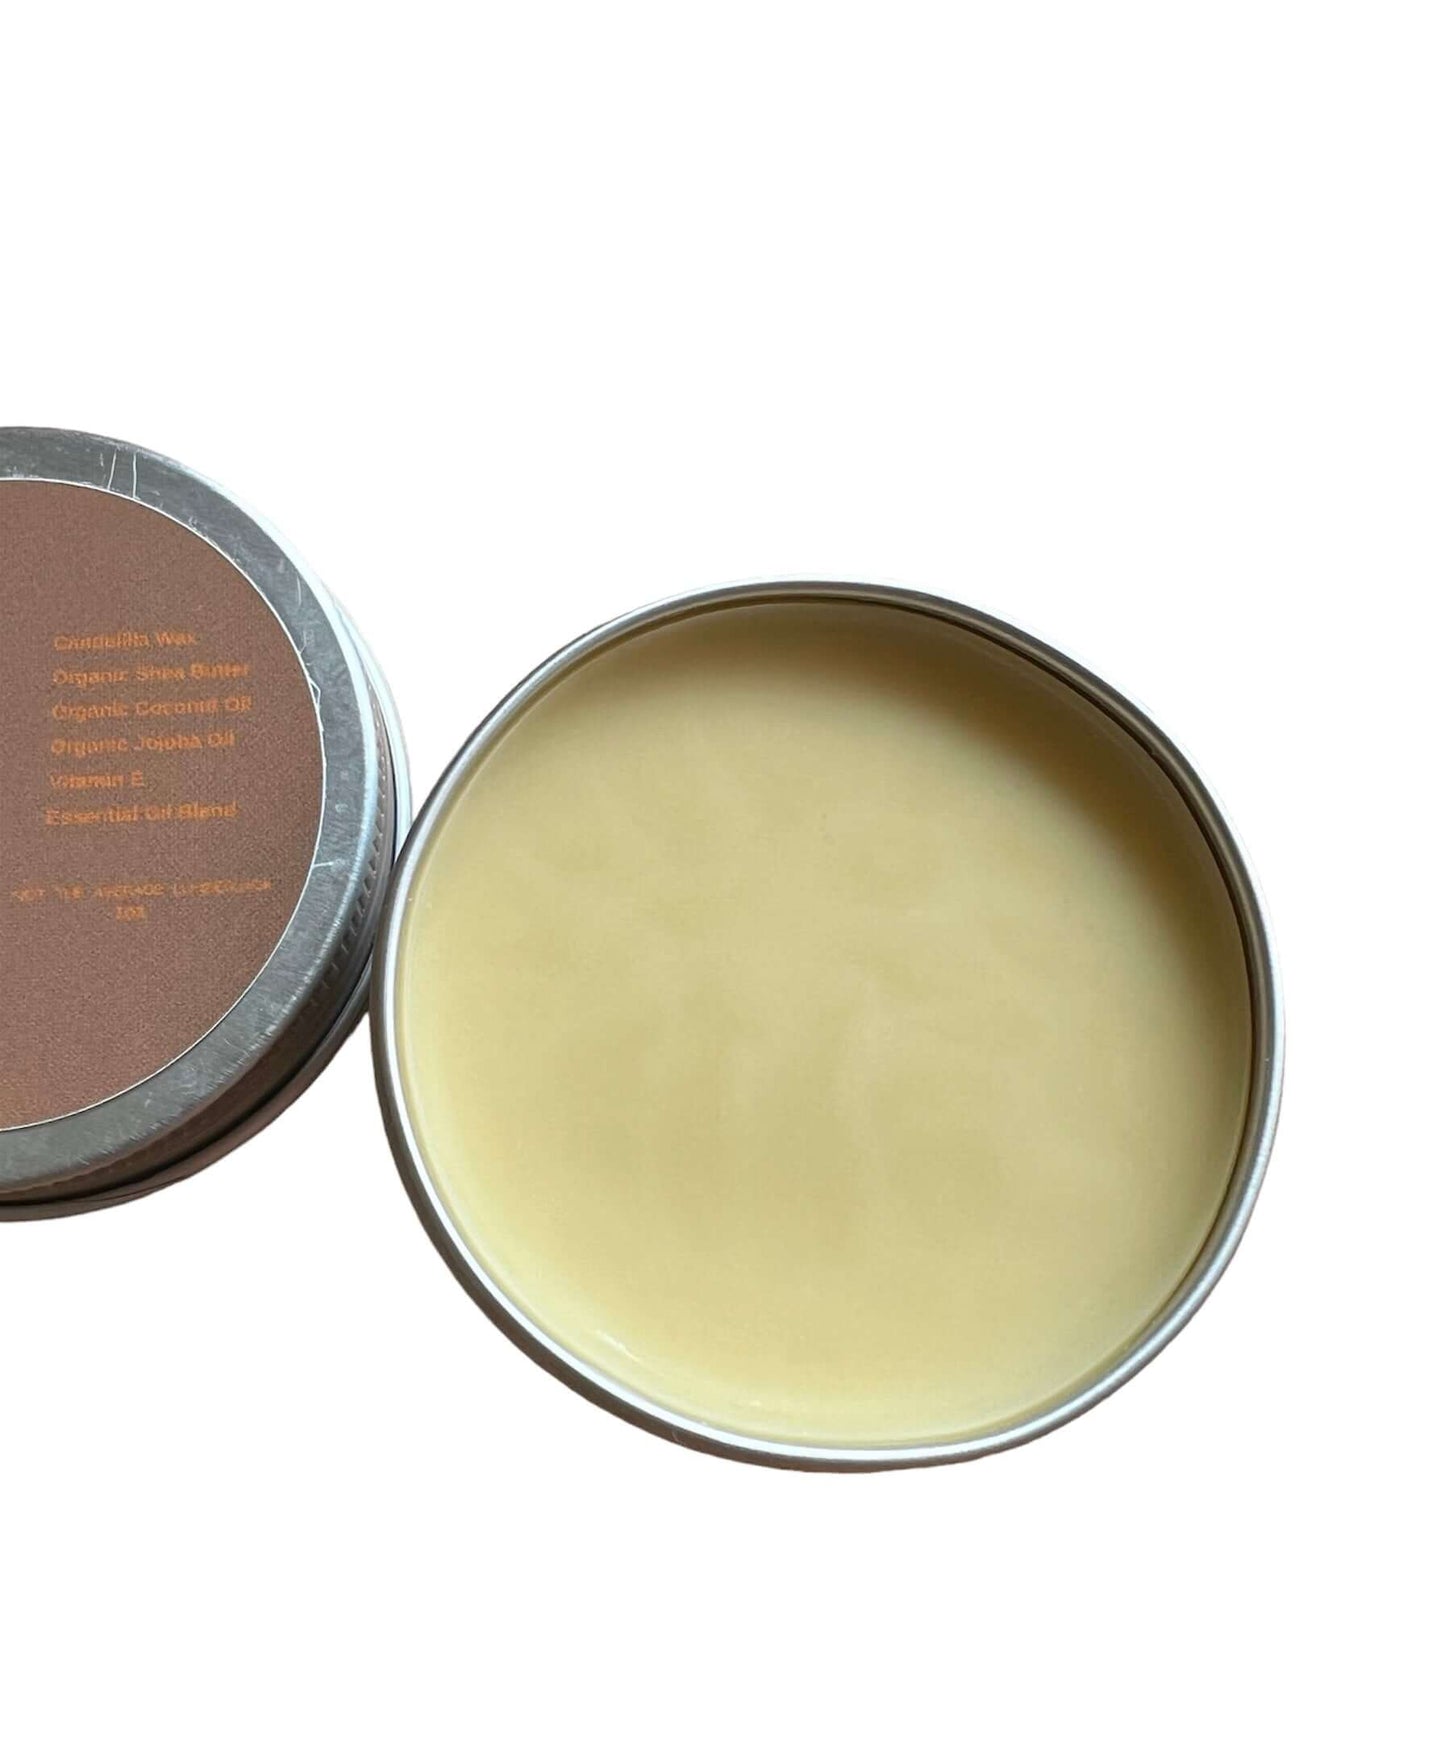 Best beard balm for taming and conditioning